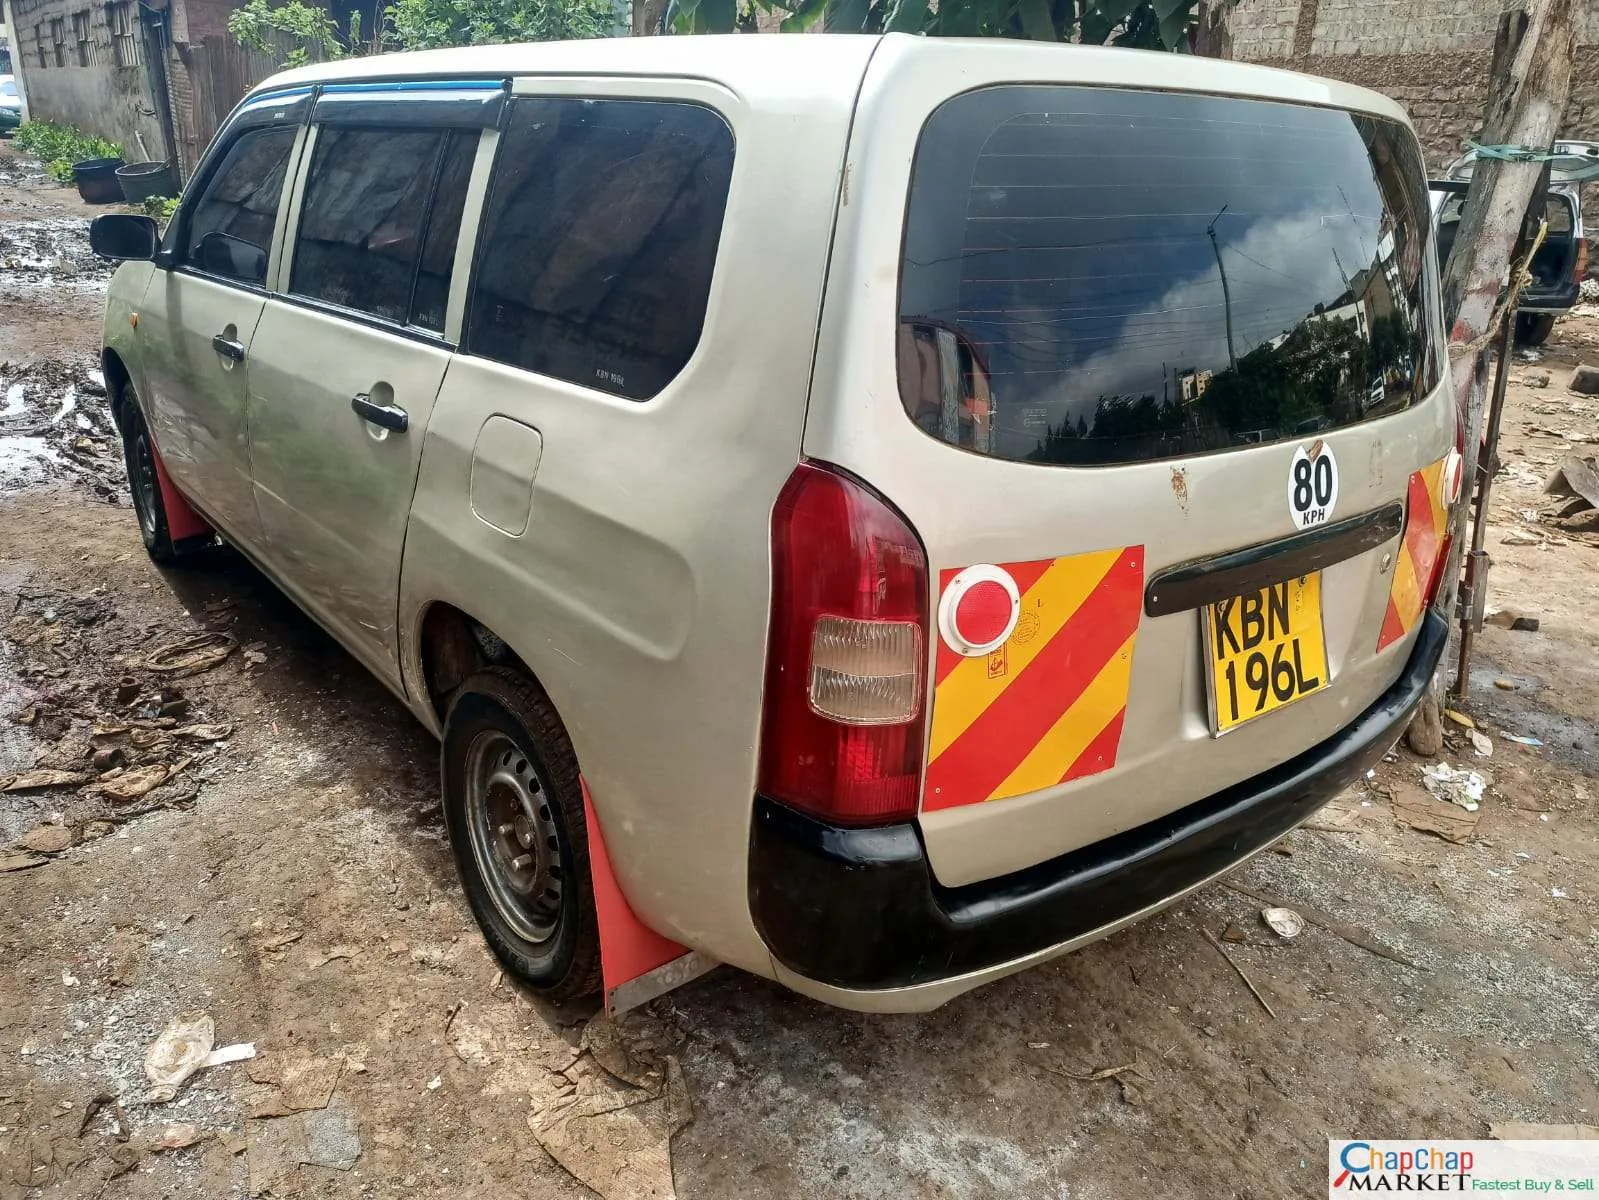 Toyota PROBOX for sale in Kenya QUICK SALE You Pay 30% Deposit Trade in OK EXCLUSIVE